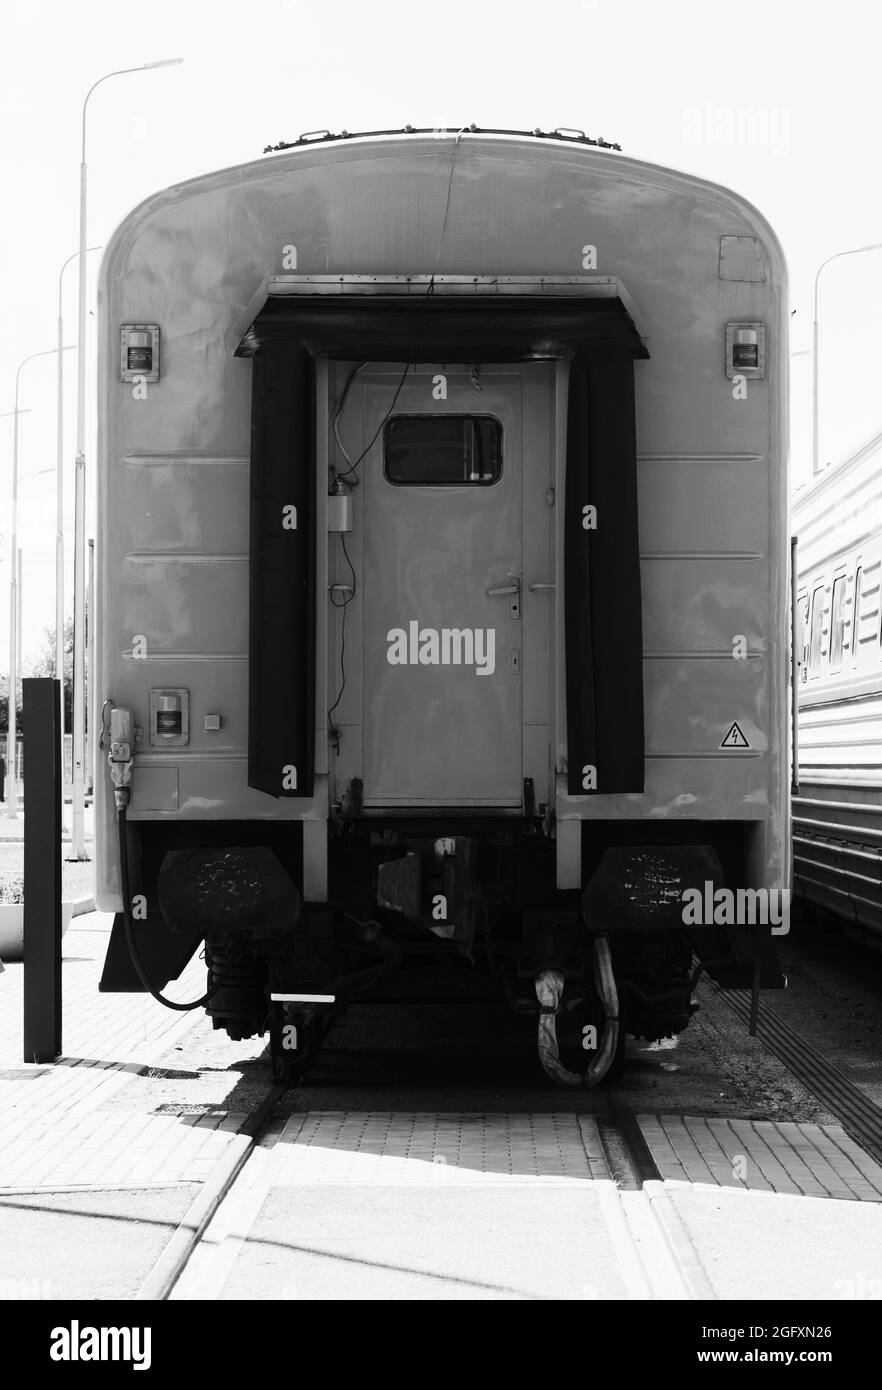 The last railway car of a passenger train, close up  black and white front view photo Stock Photo